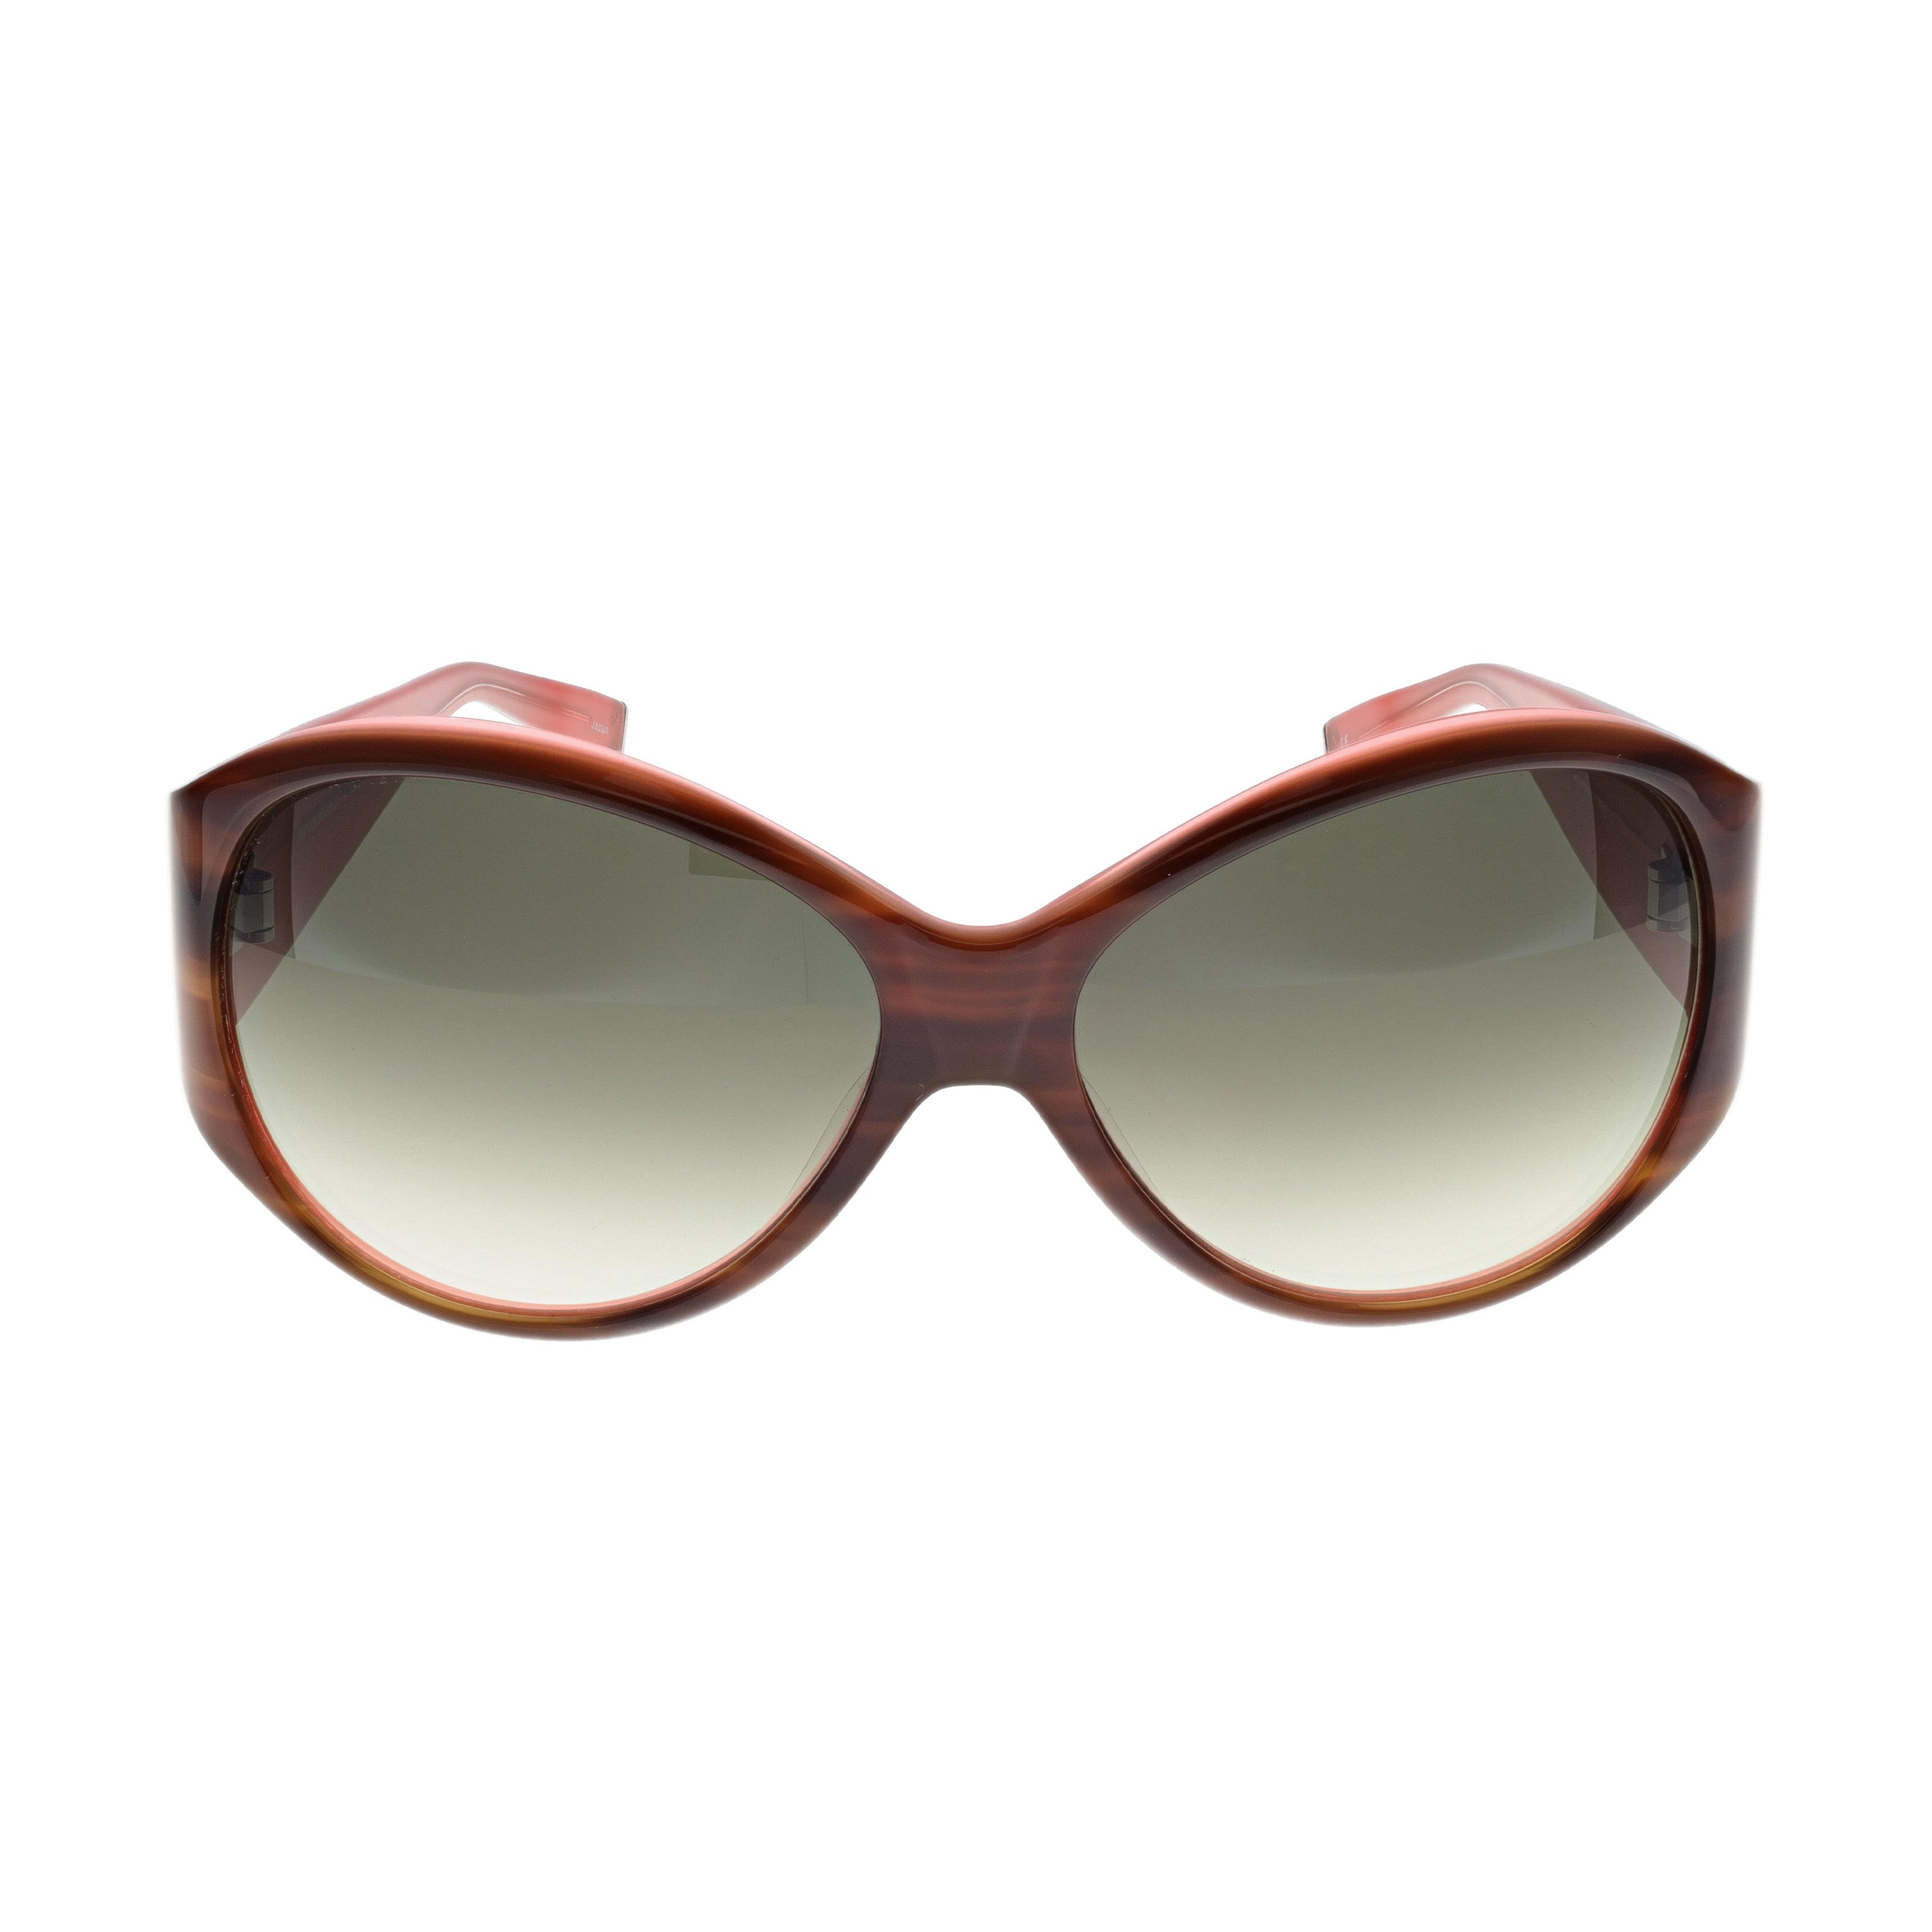 Oliver Peoples Coquette Sunglasses